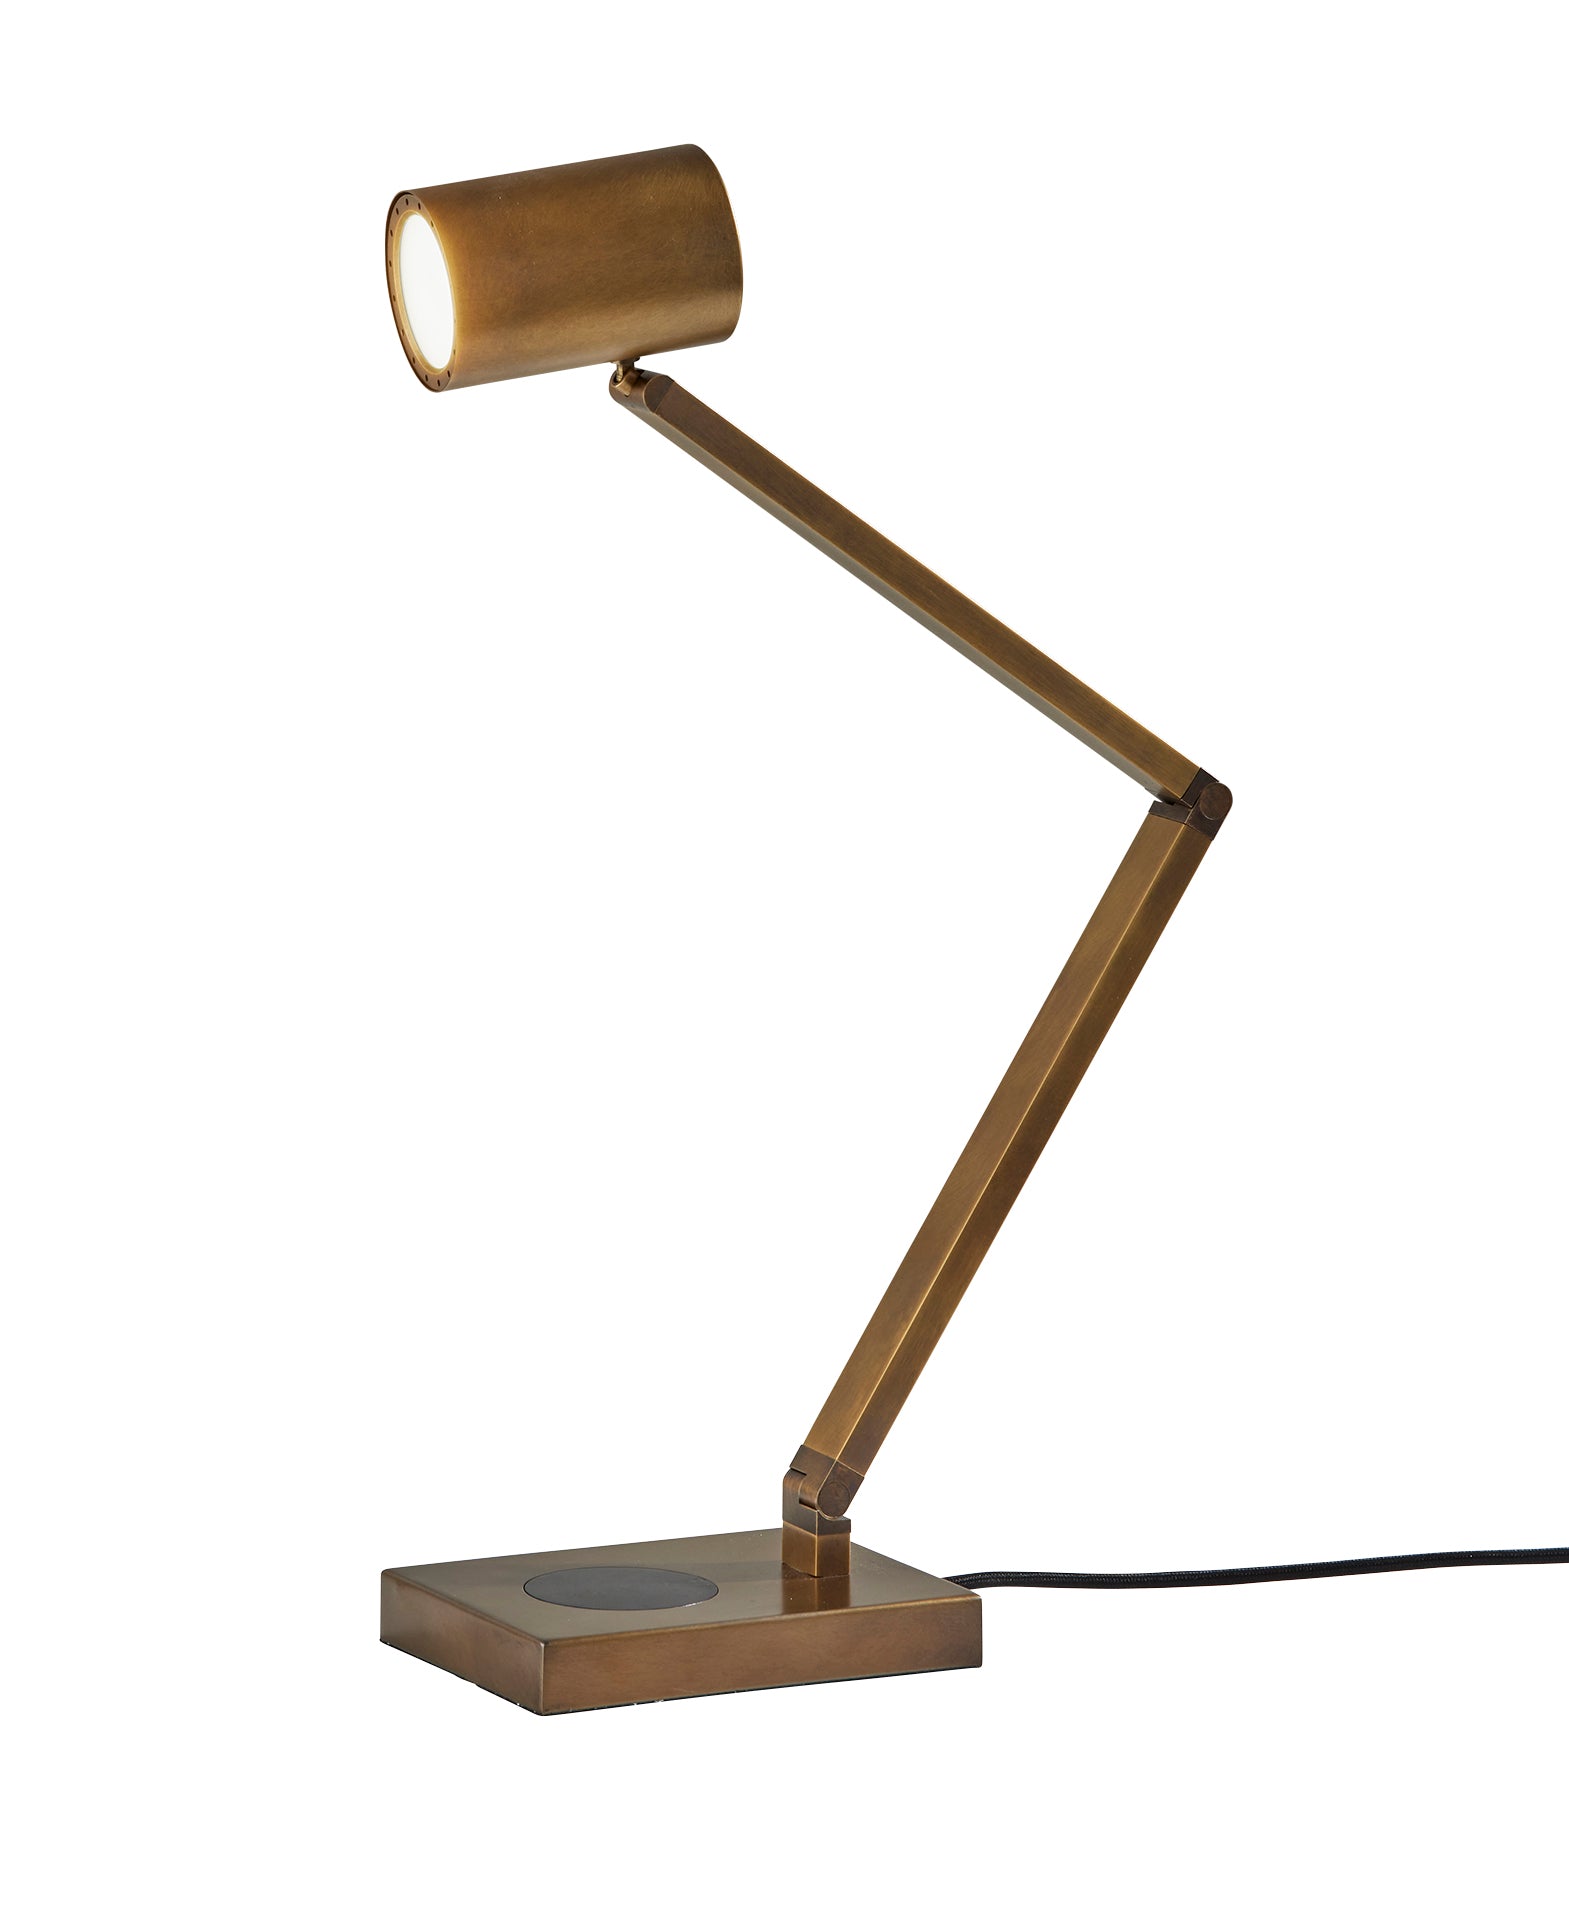 NEWMAN Table lamp Gold - 10036311LBB | ADESSO